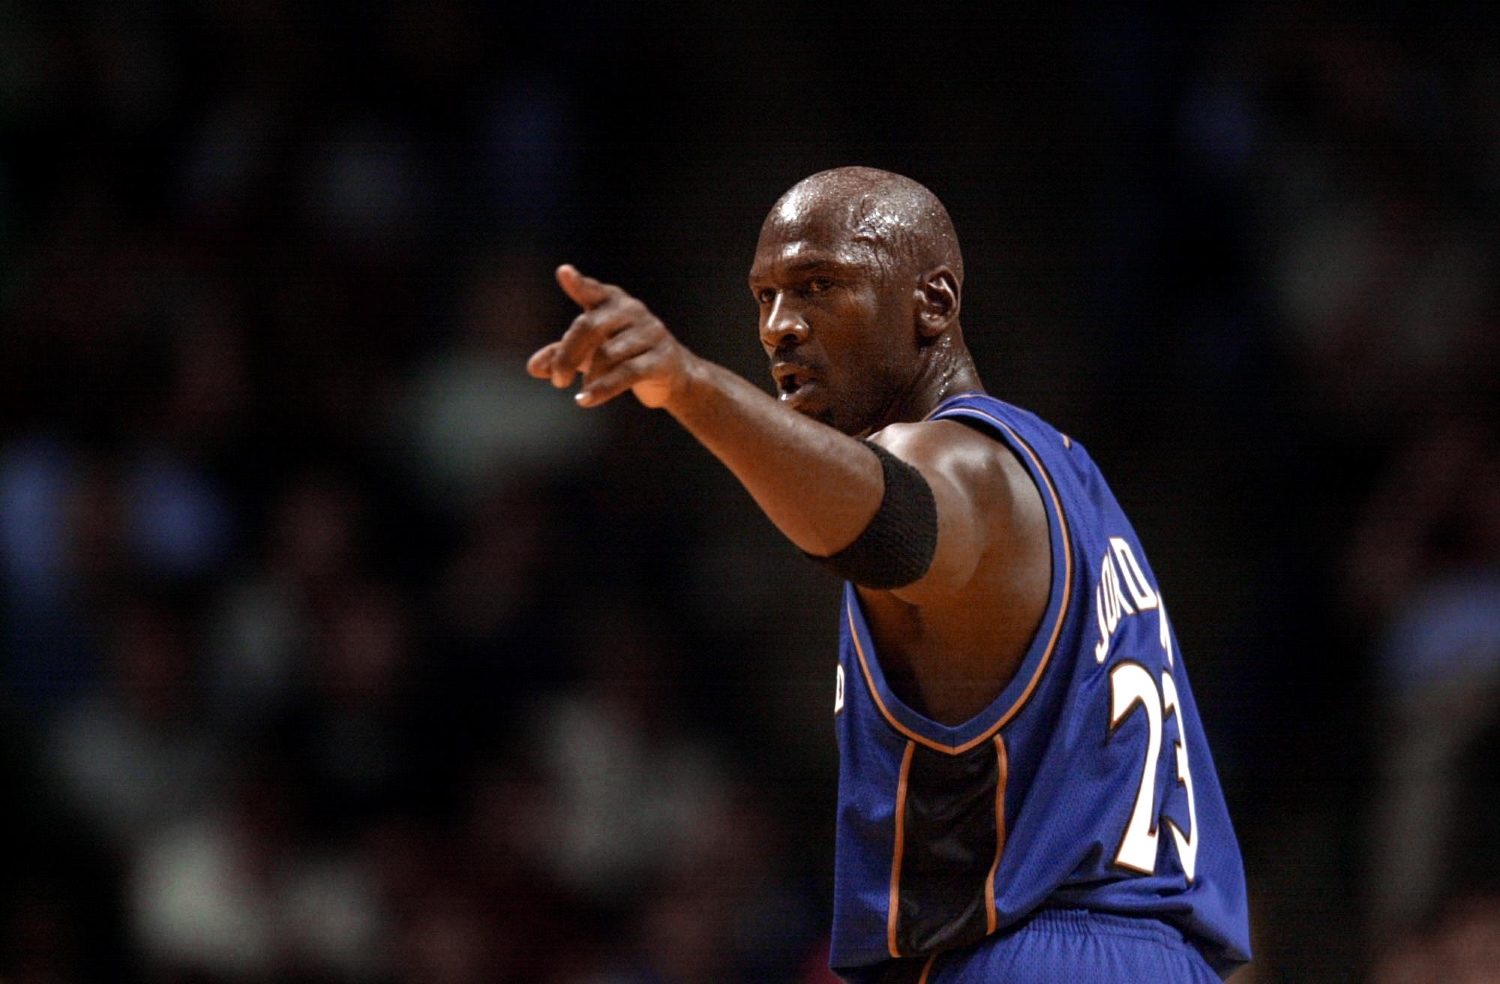 Michael Jordan points down the court during the first quarter of a preseason game with the Washington Wizards.